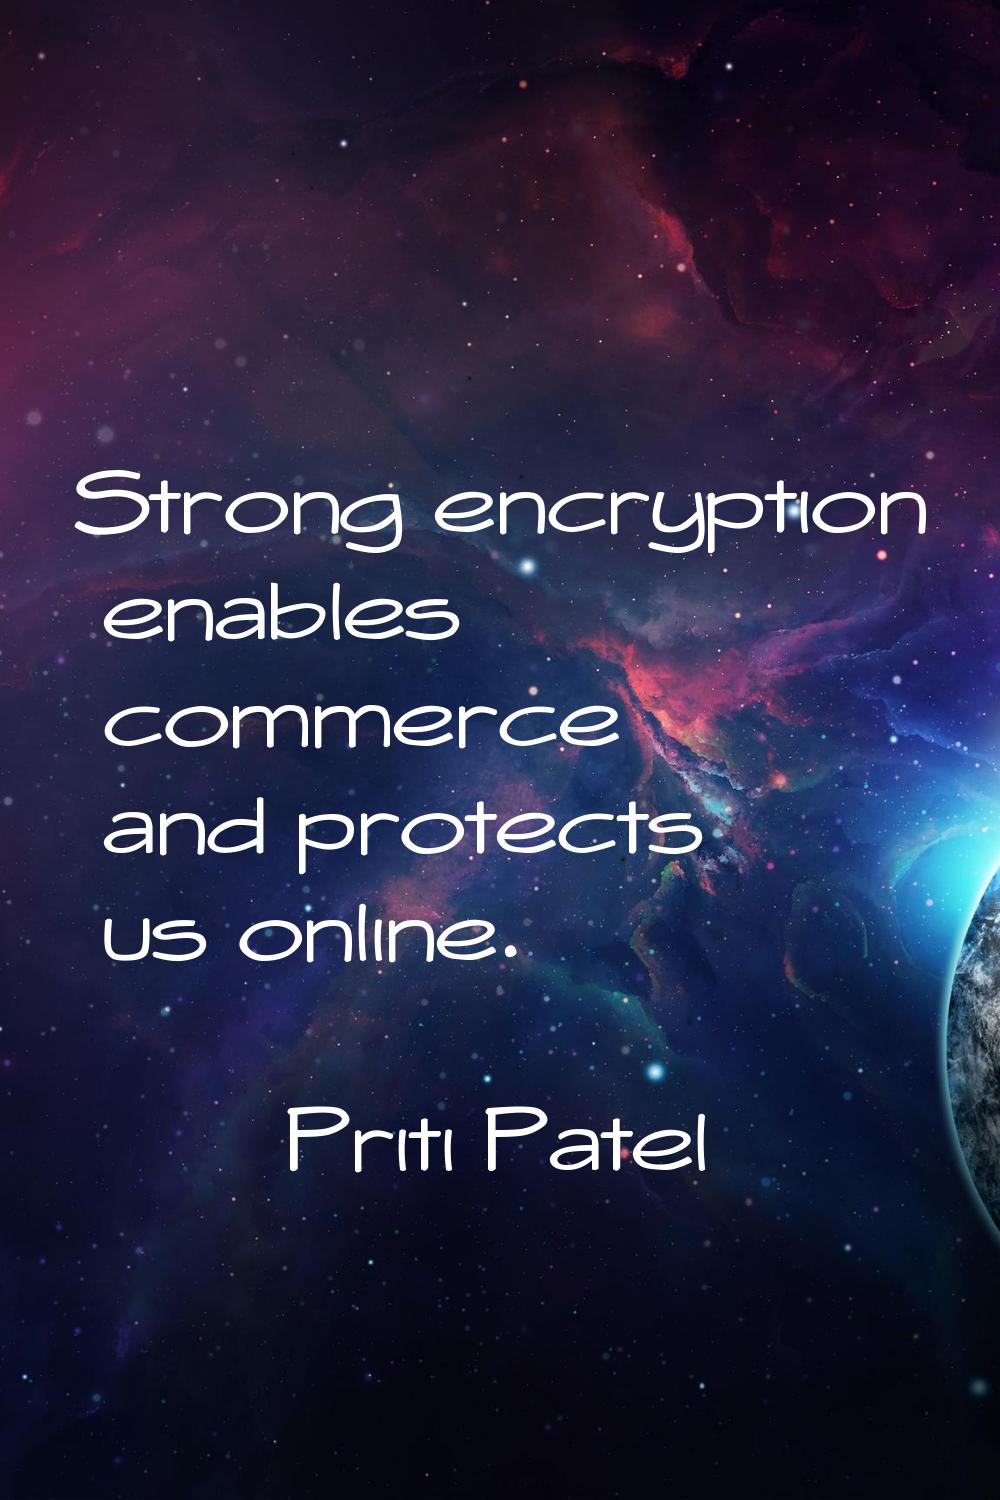 Strong encryption enables commerce and protects us online.